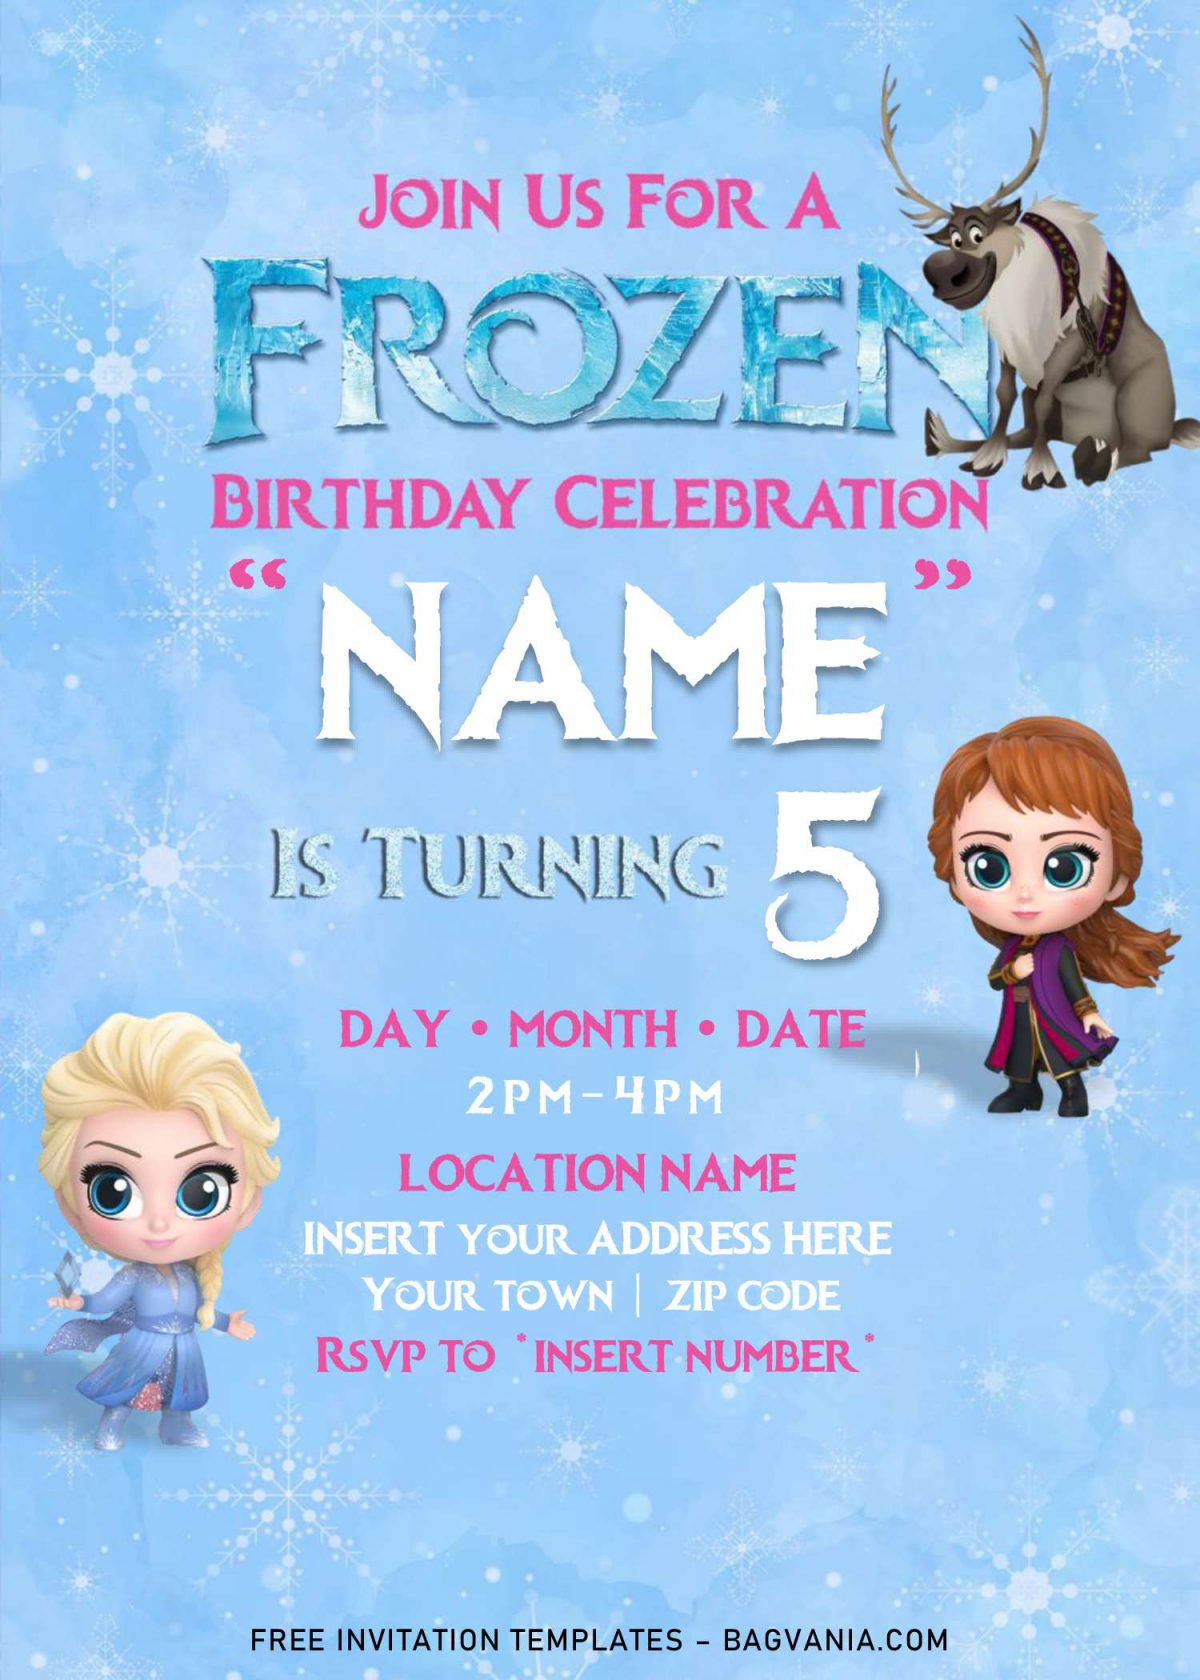 Free Frozen Birthday Invitation Templates For Word and has Chiby Elsa and Anna